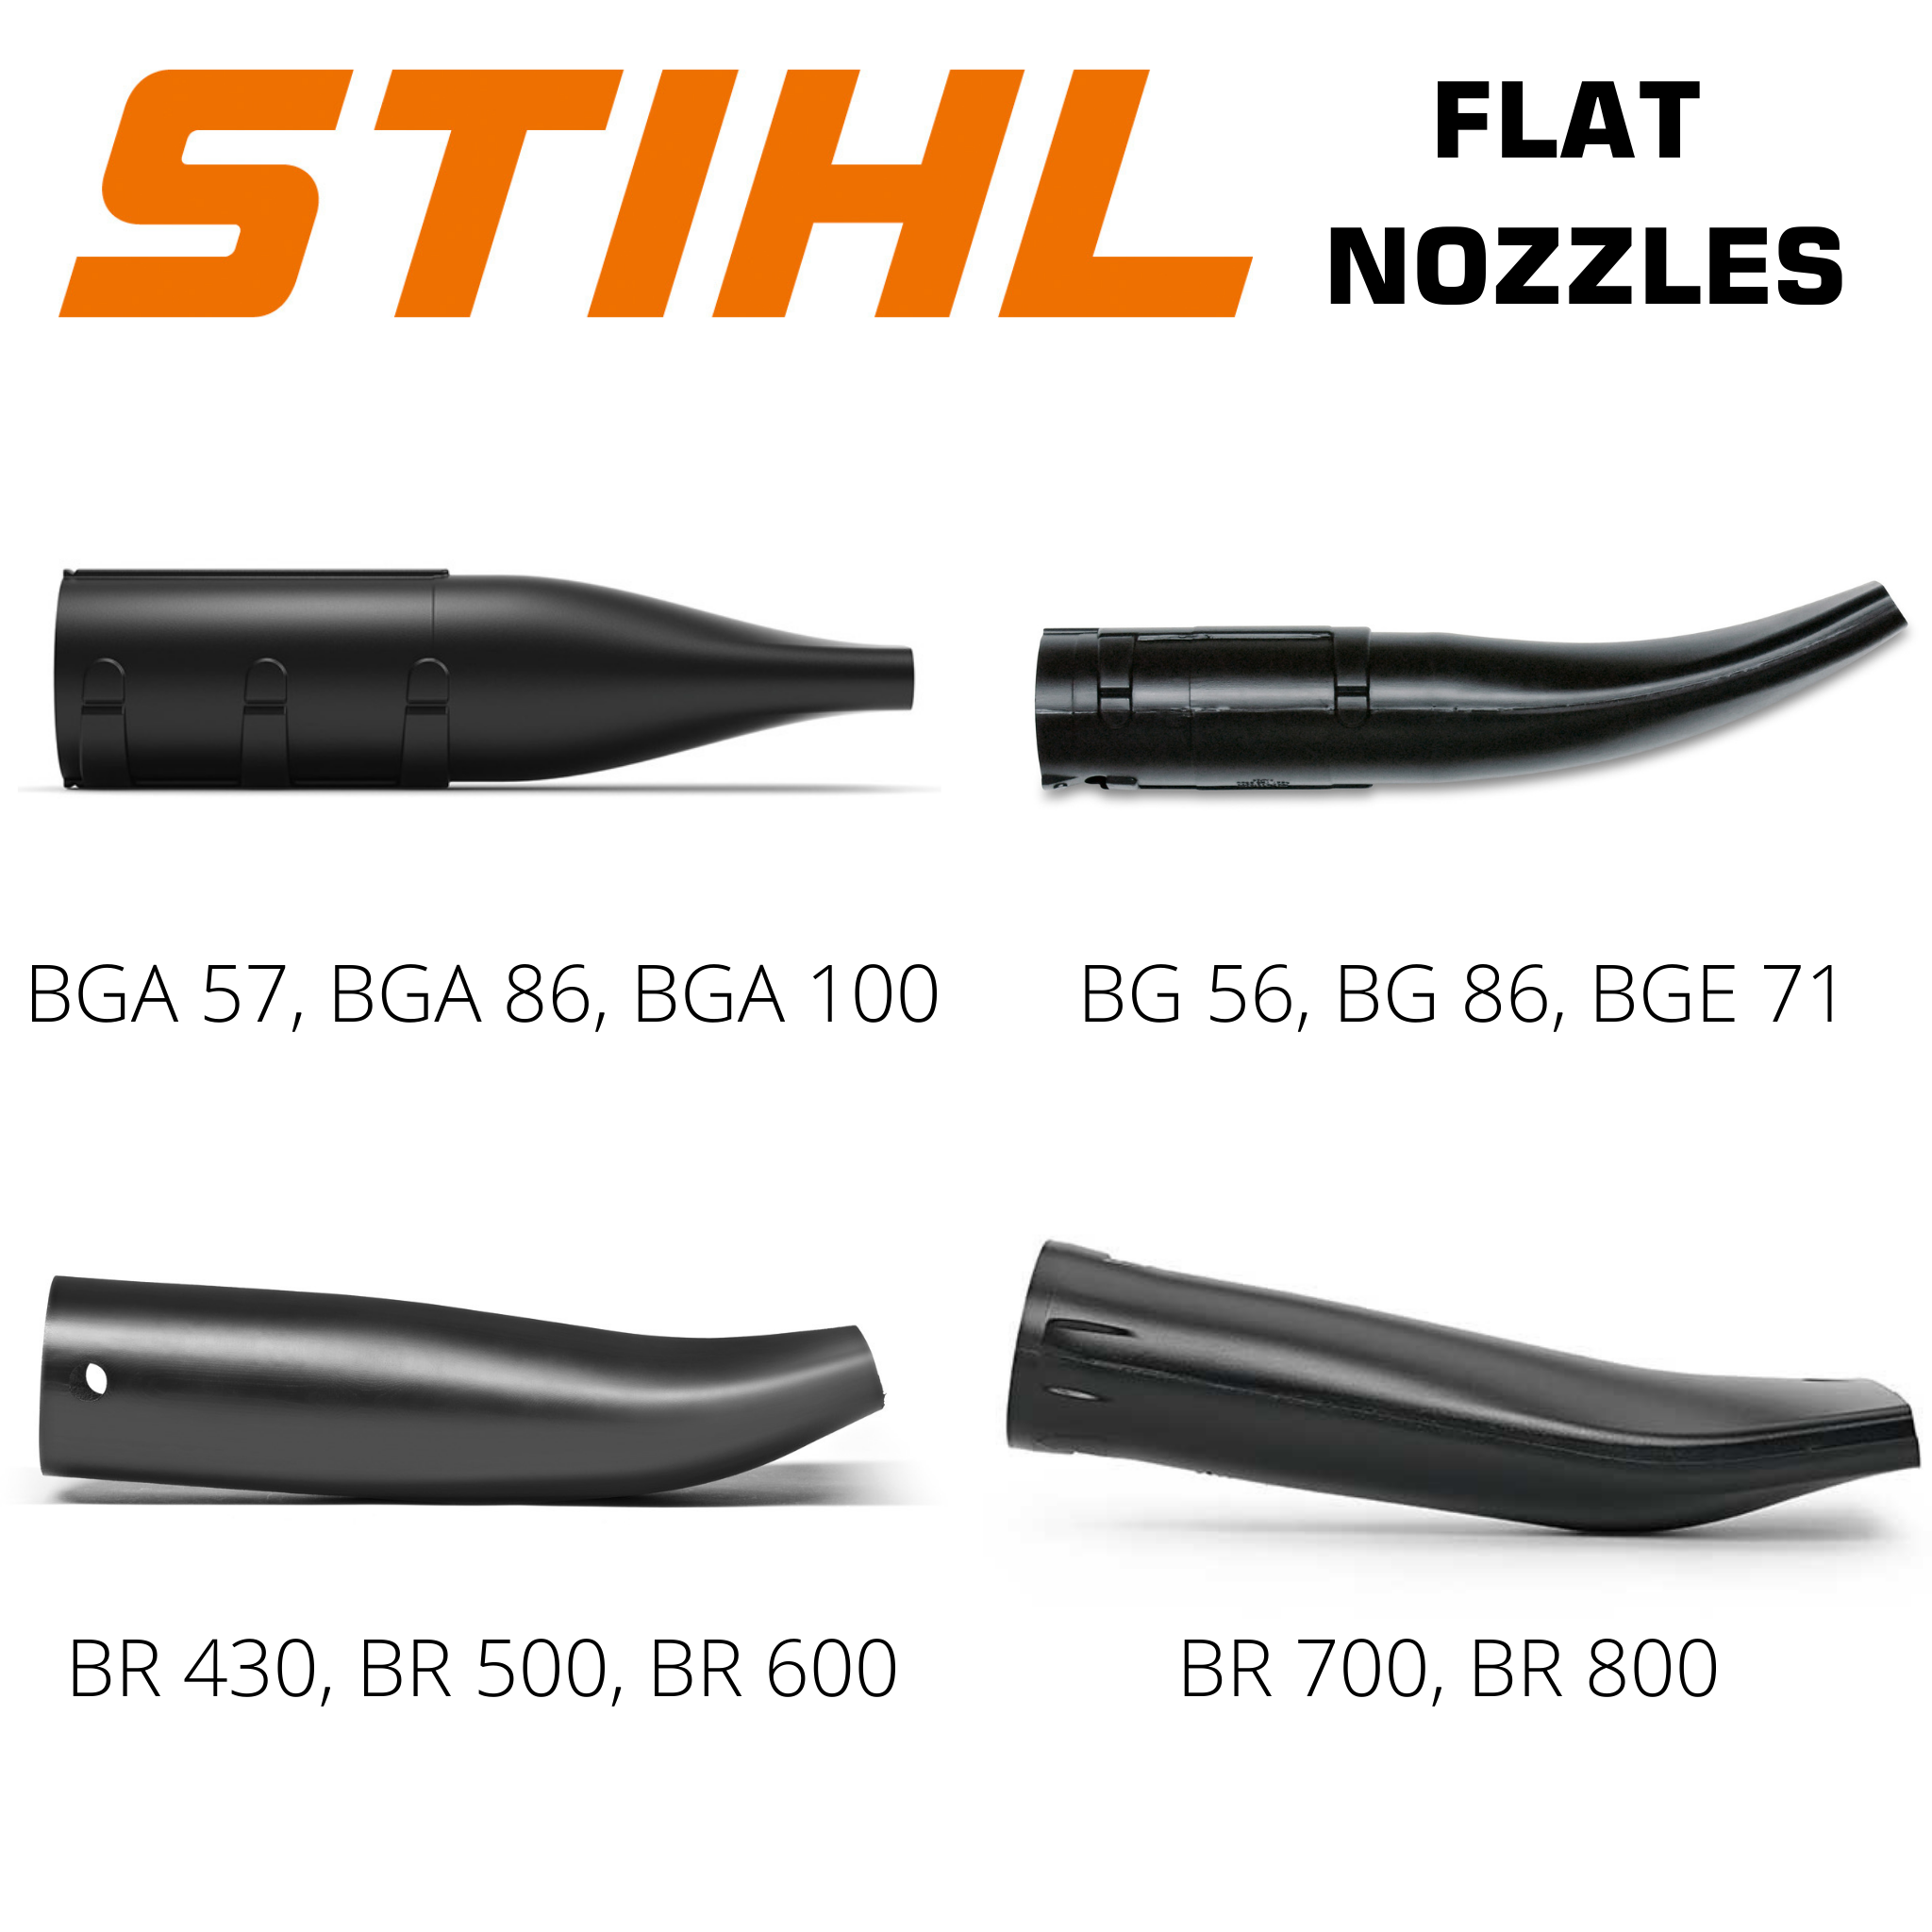 Flat Nozzles for Stihl Leaf Blowers